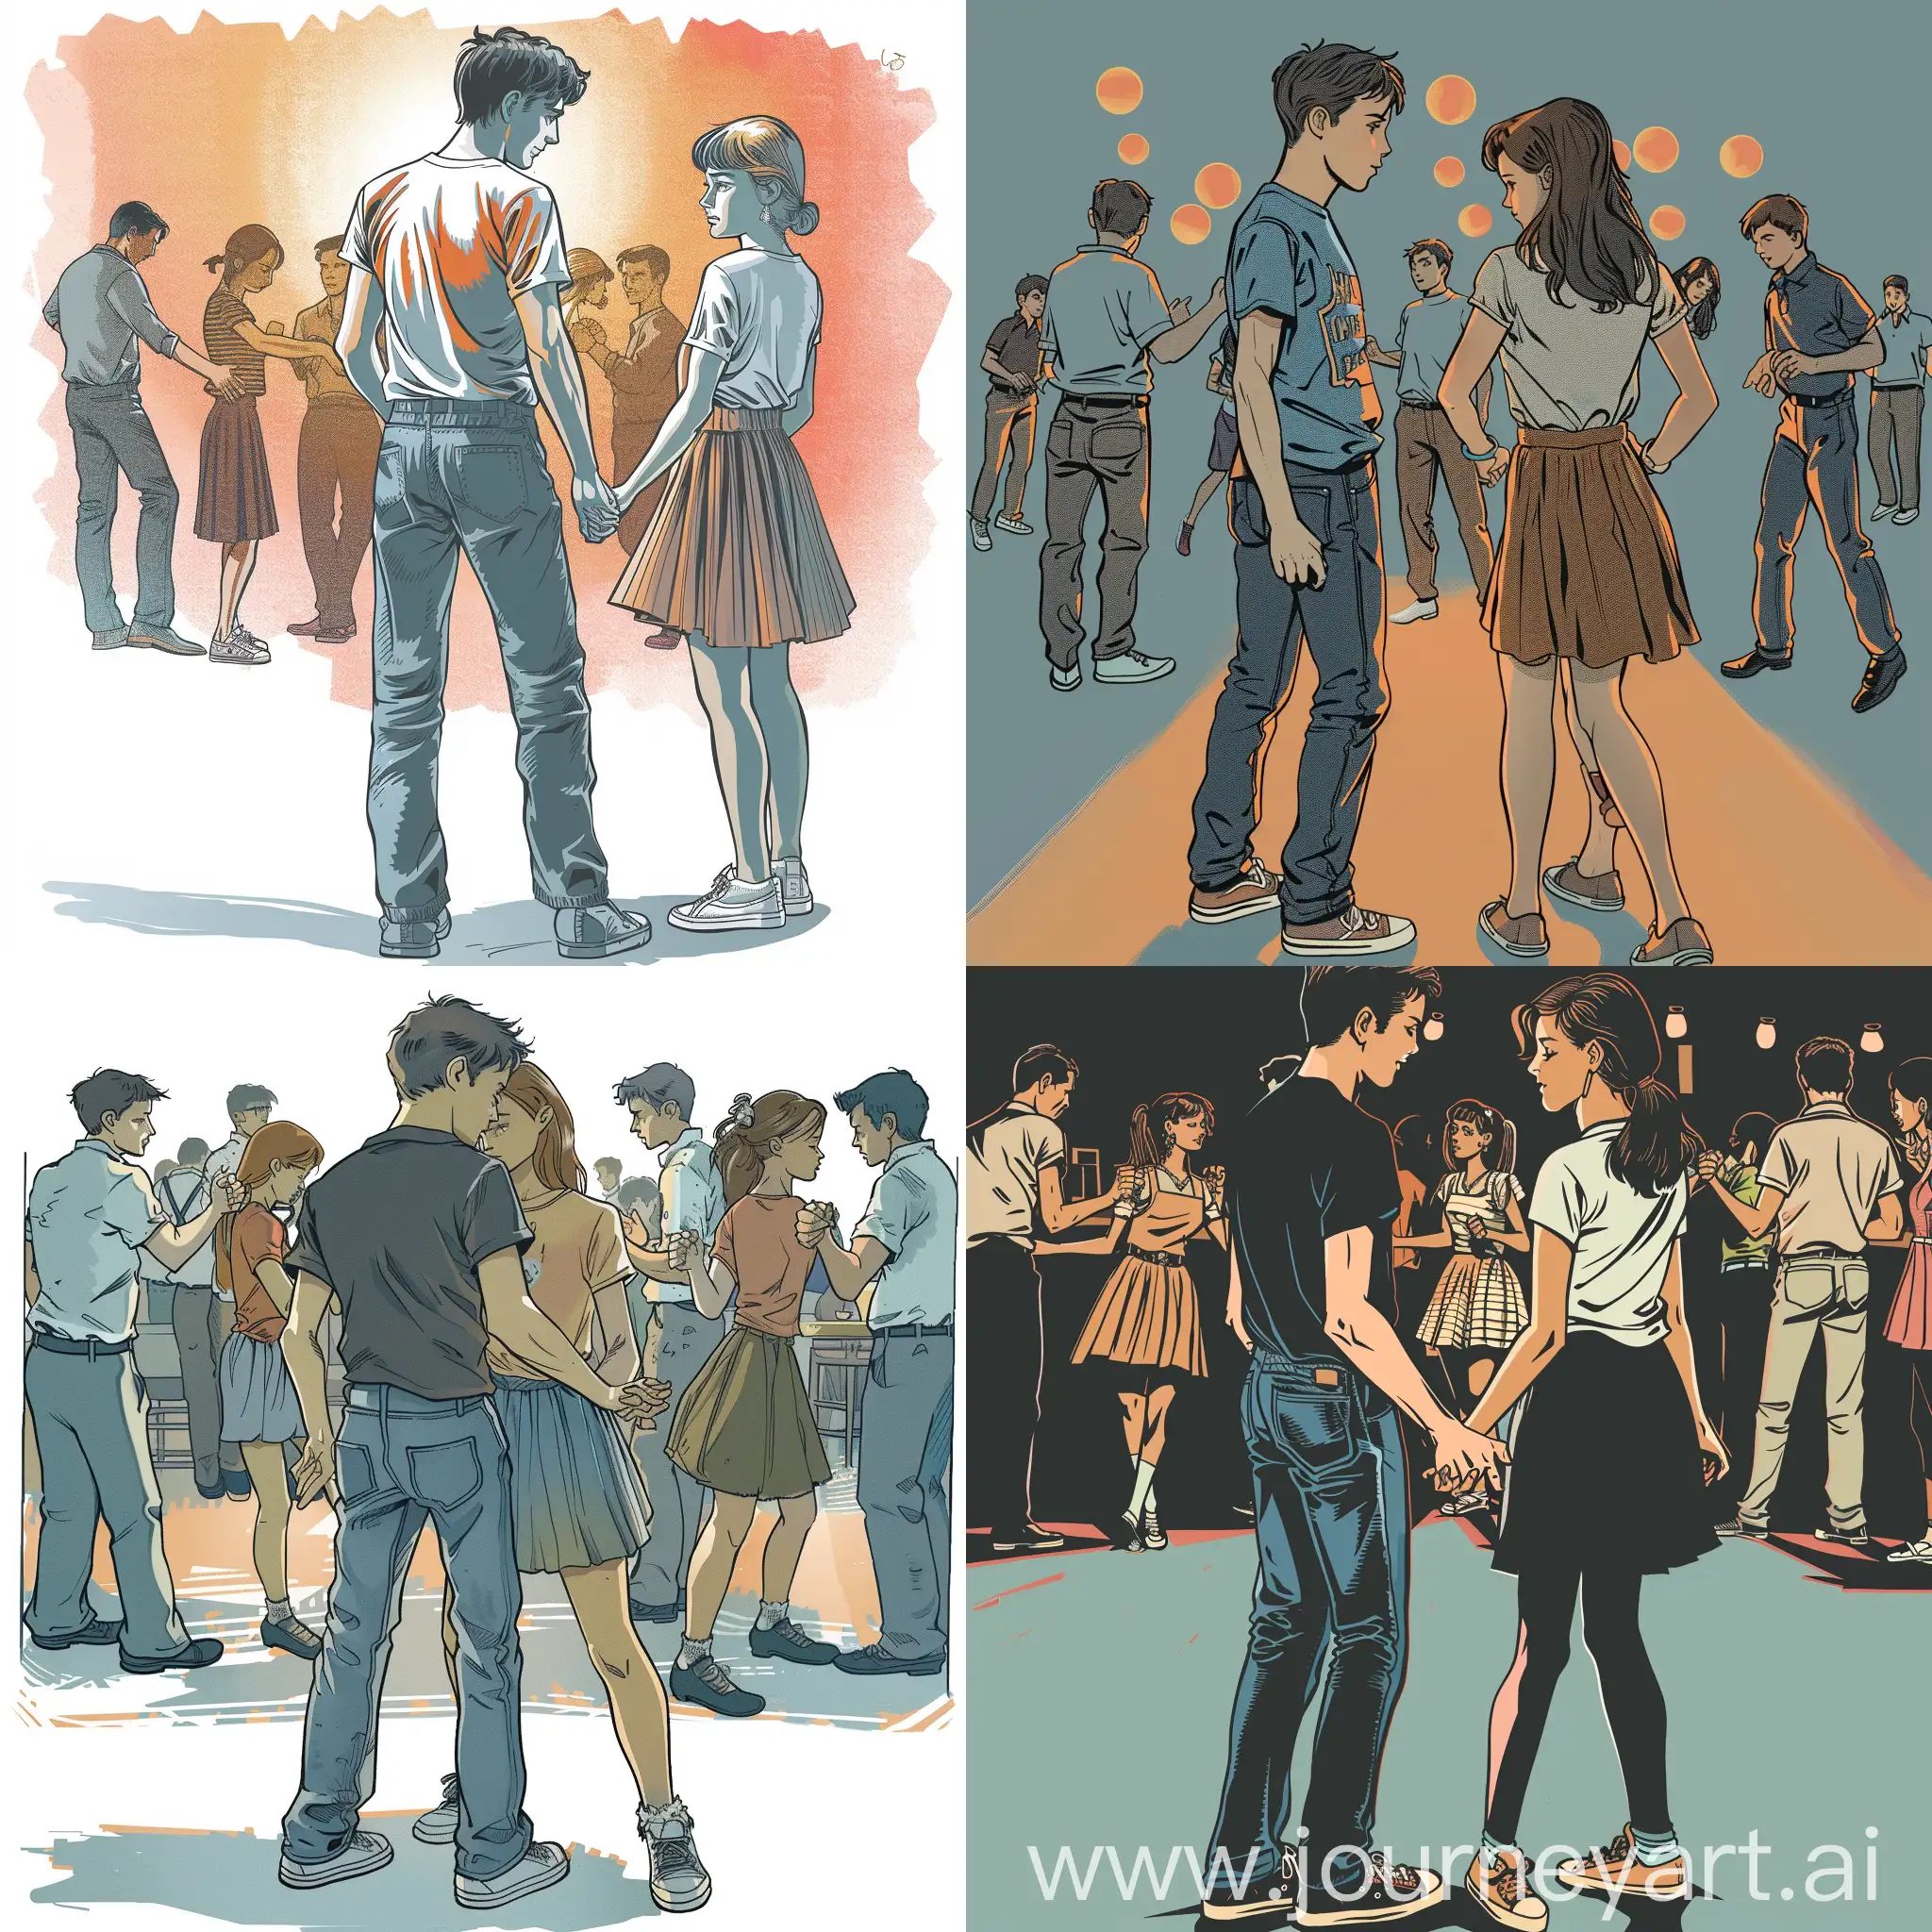 Colorful-MangaStyle-Lindy-Hop-Dance-at-Cafe-Party